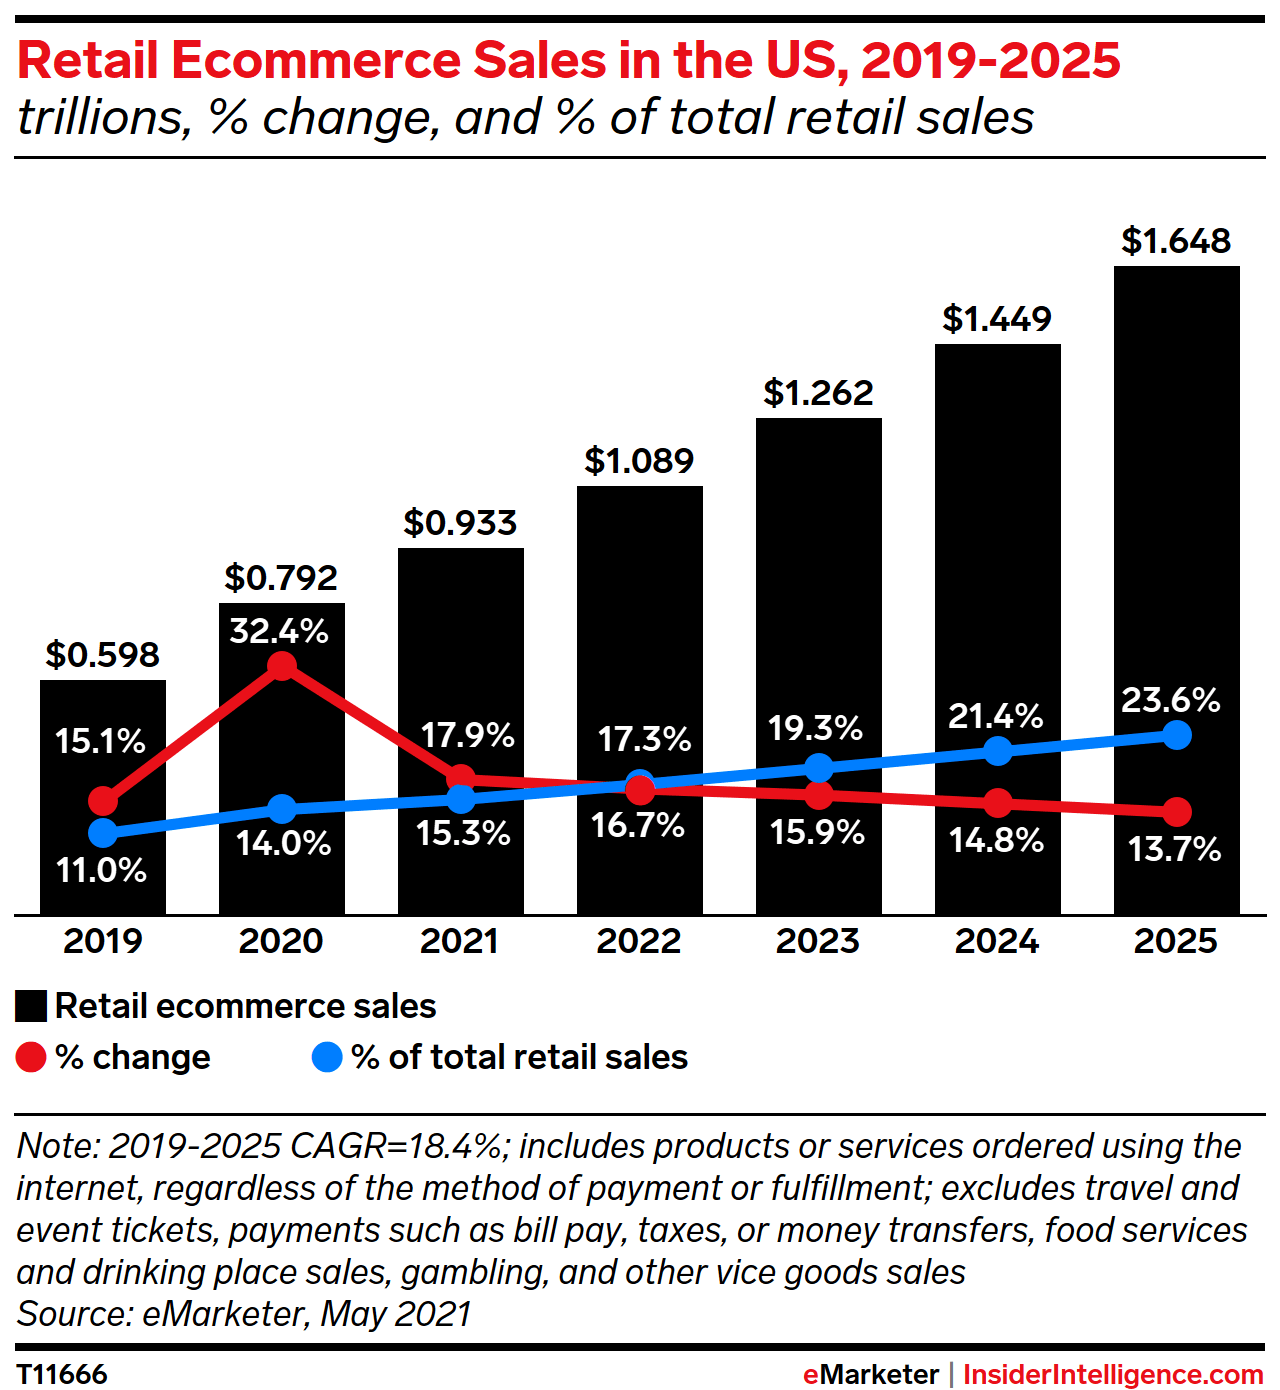 a graph showing retail ecommerce sales in the us